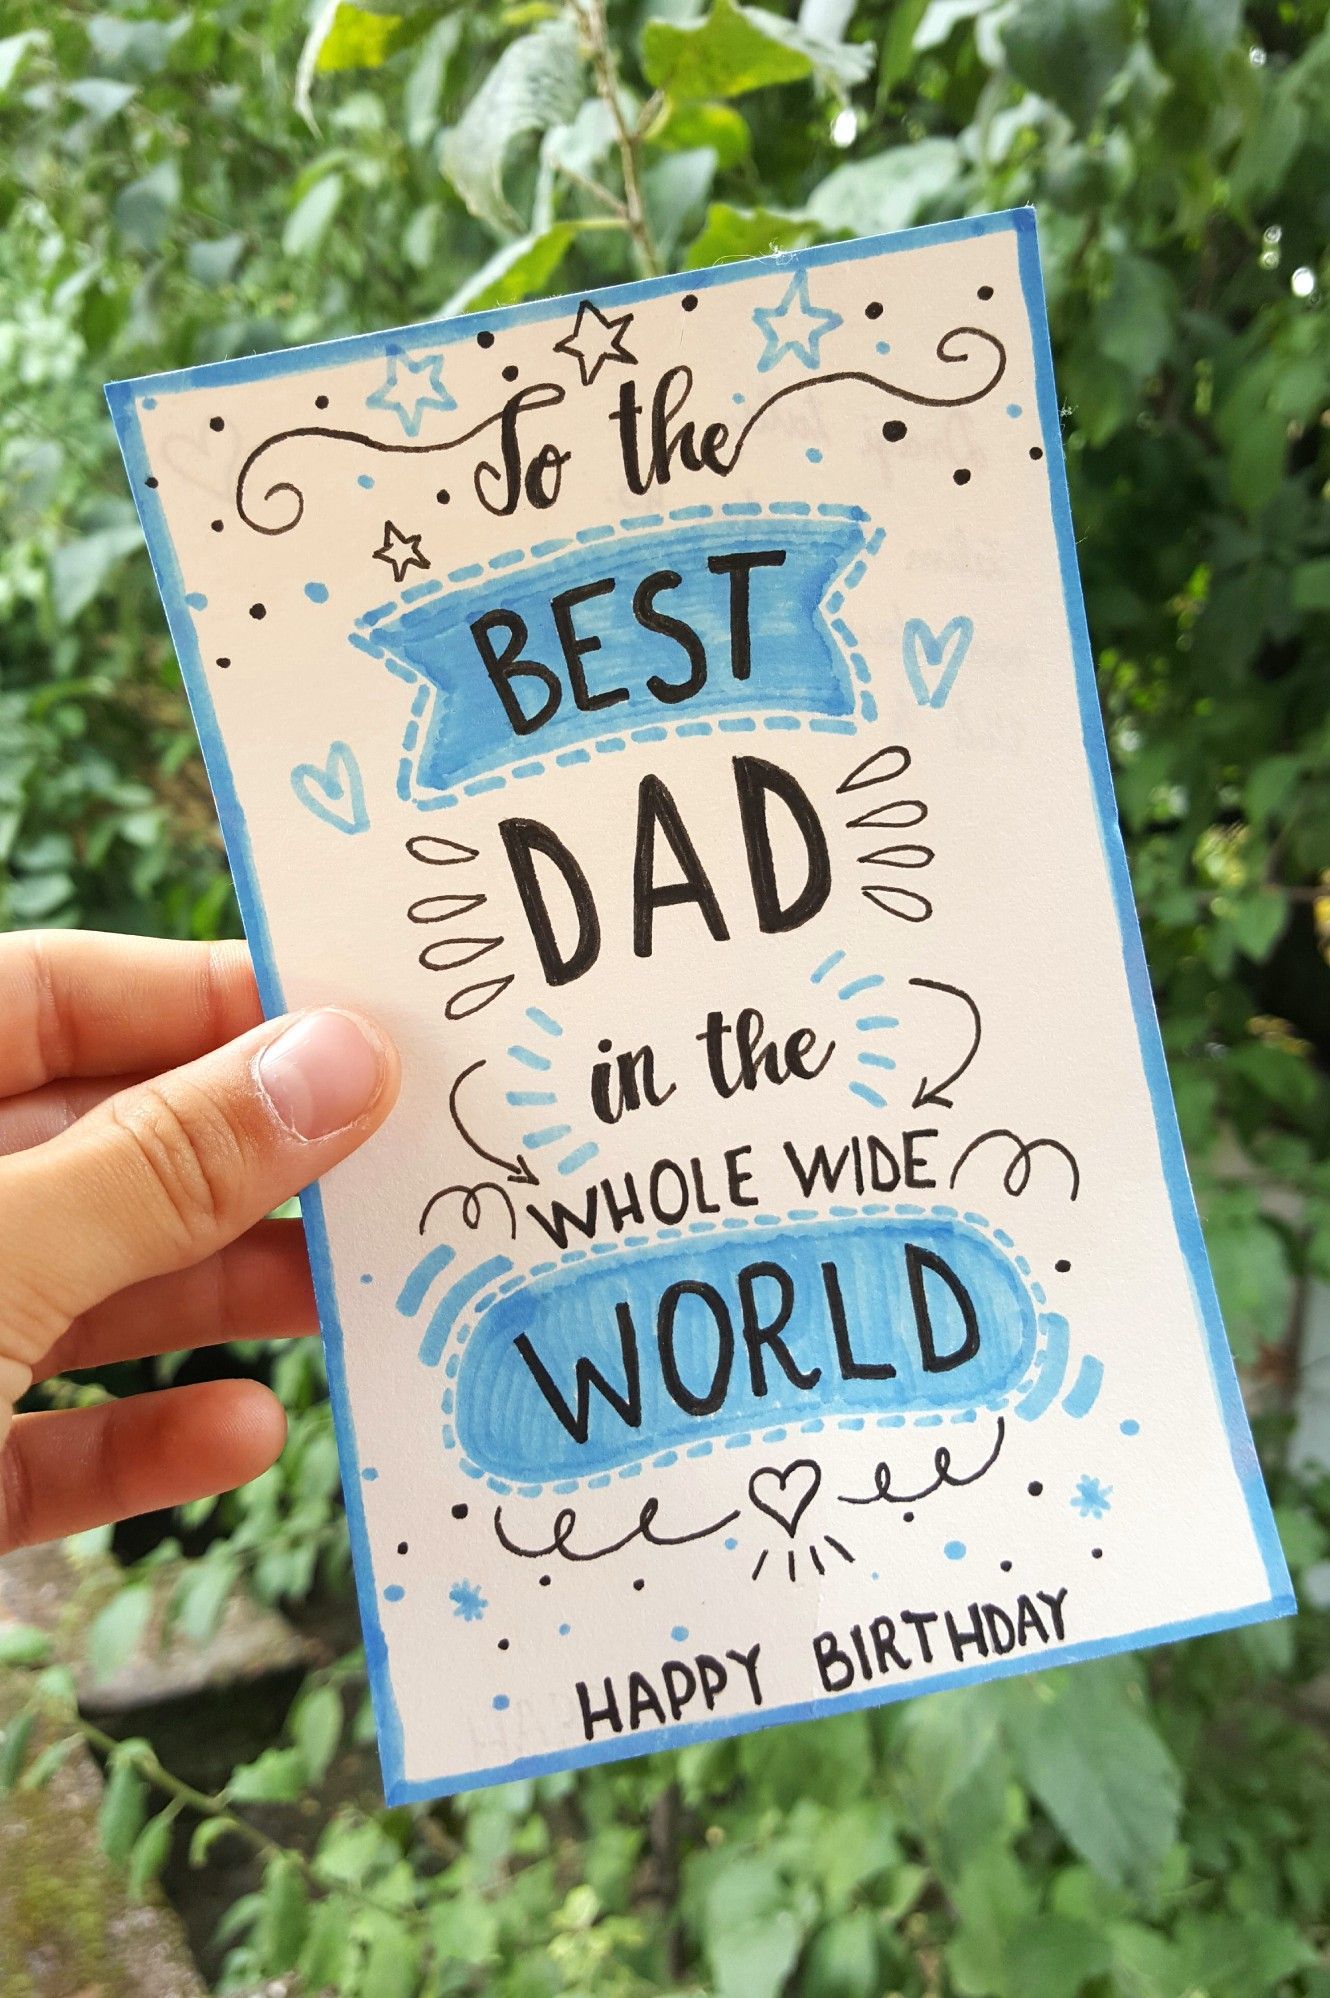 Birthday card for dad, birthday card for best dad in the whole wide world -   24 clay crafts for dad
 ideas